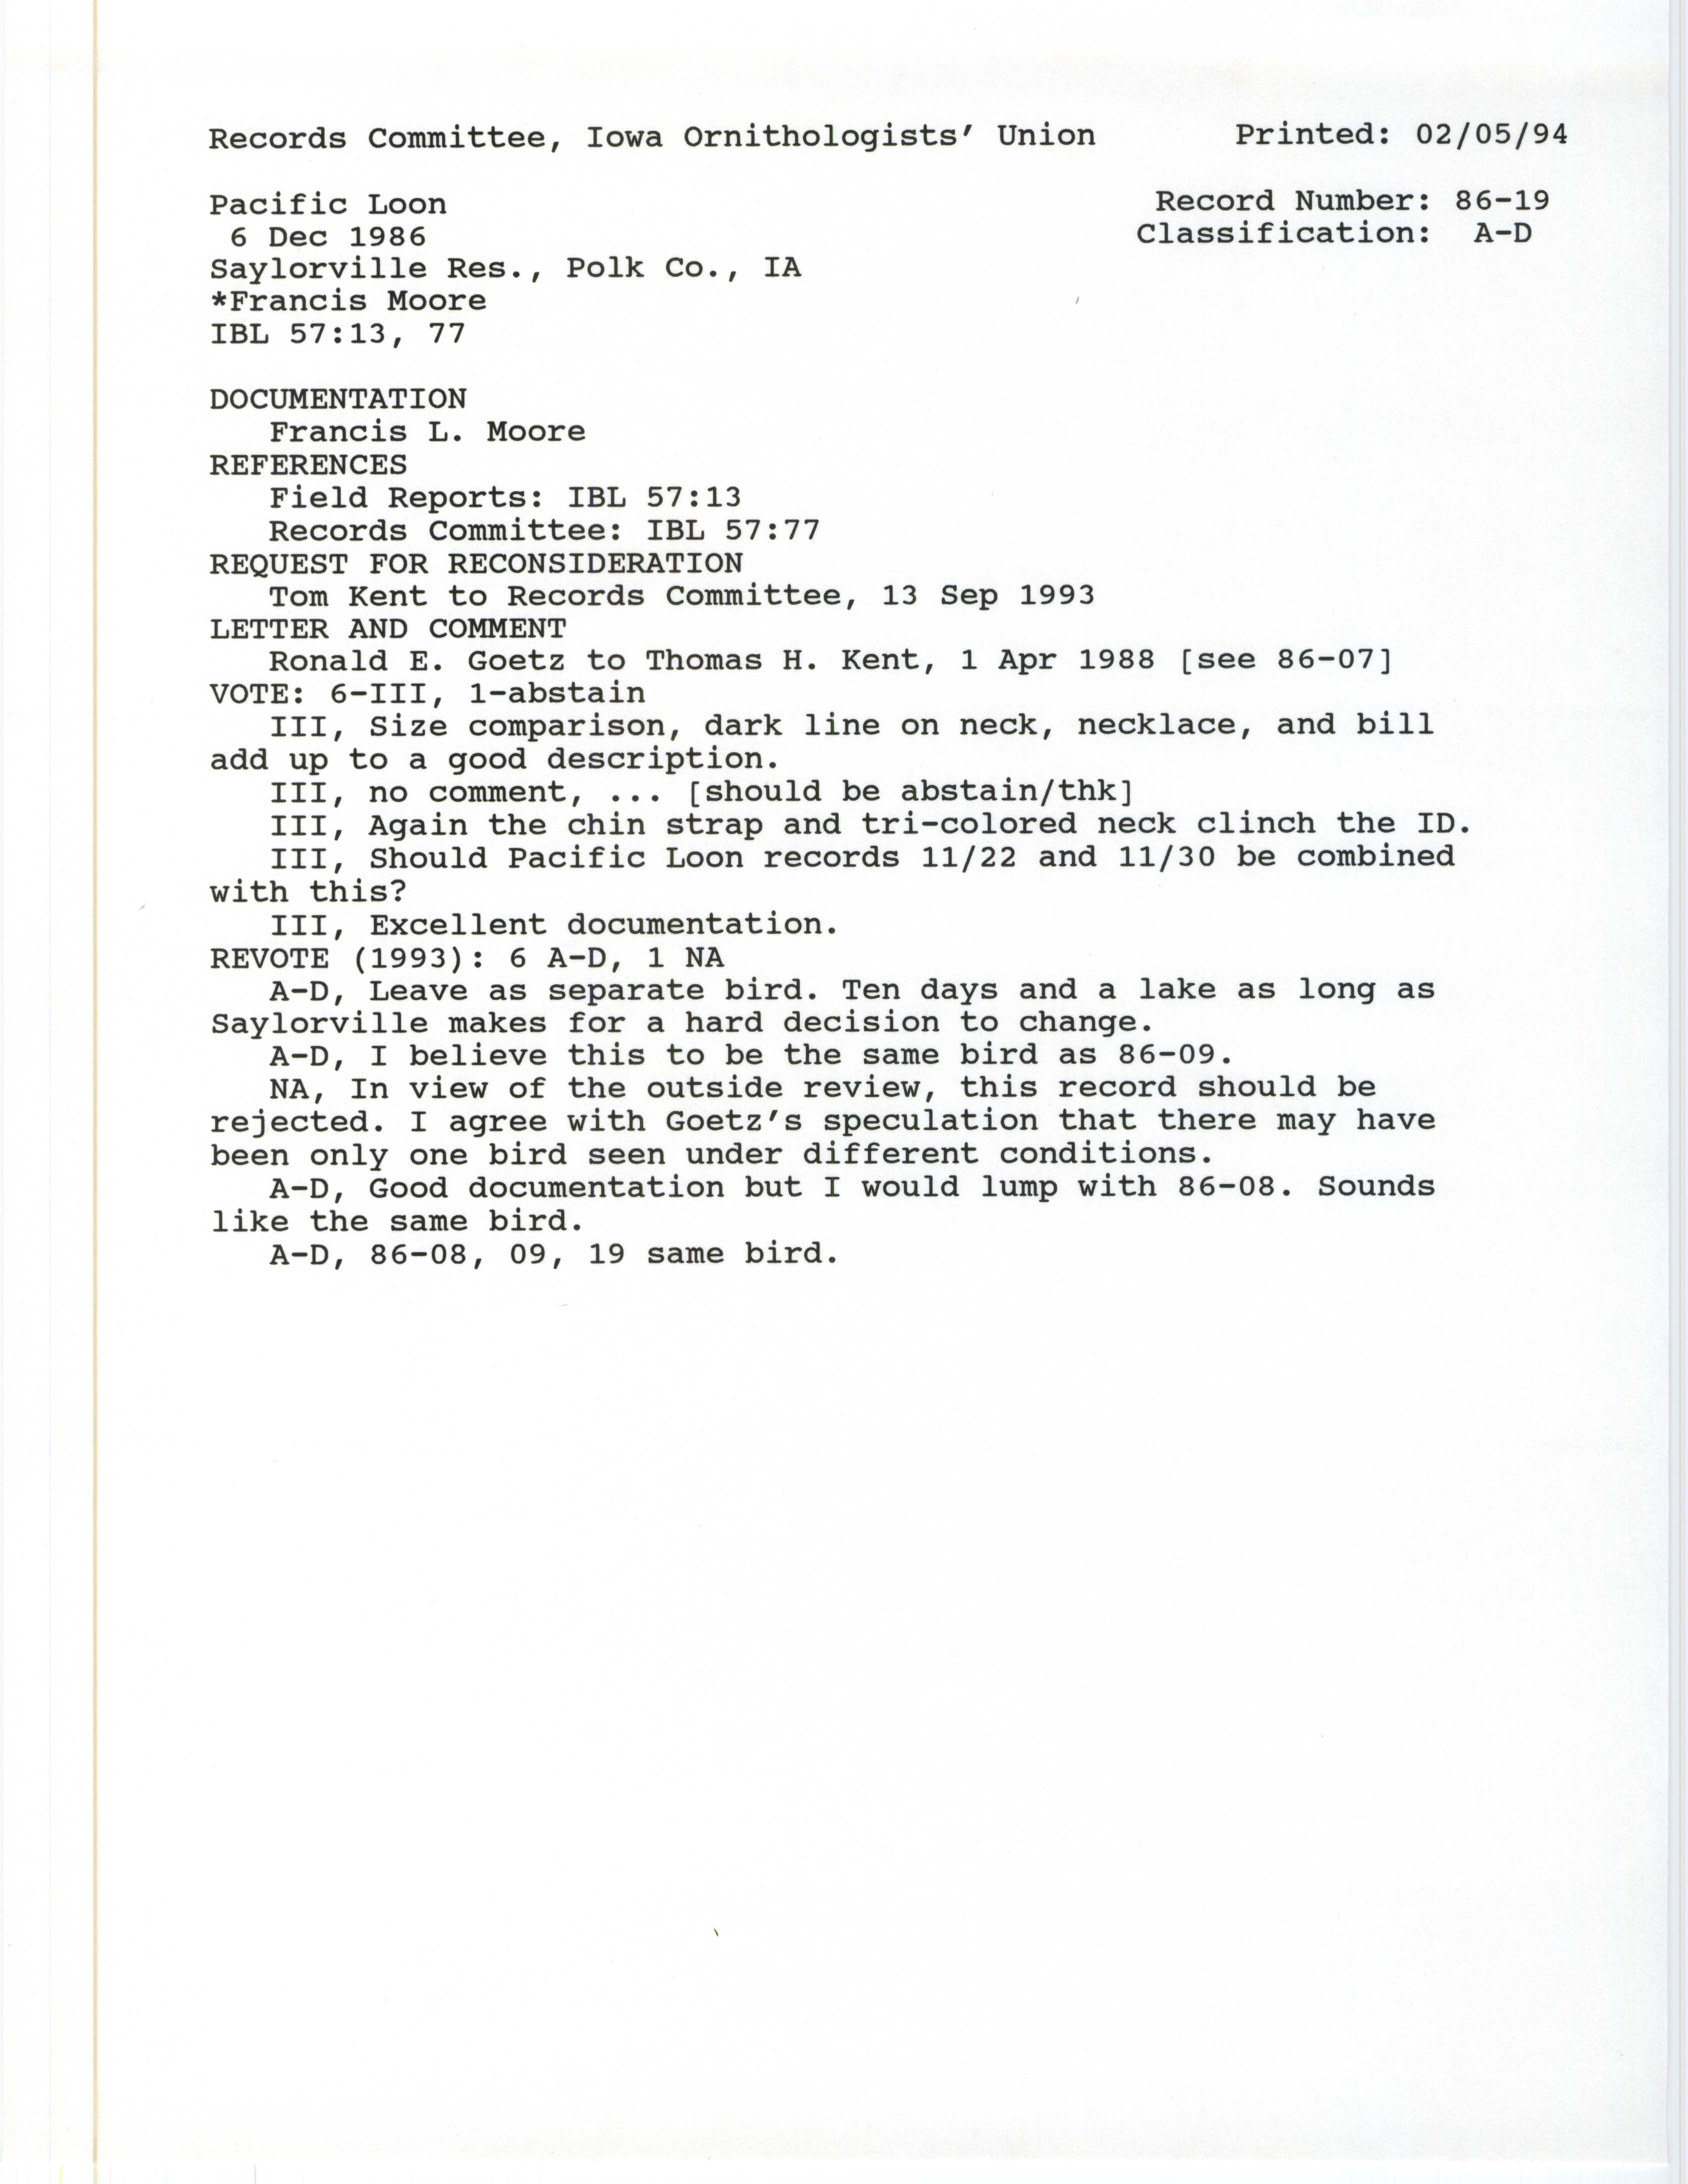 Record Committee review for rare bird sighting of Pacific Loon at Saylorville Reservoir, 1986